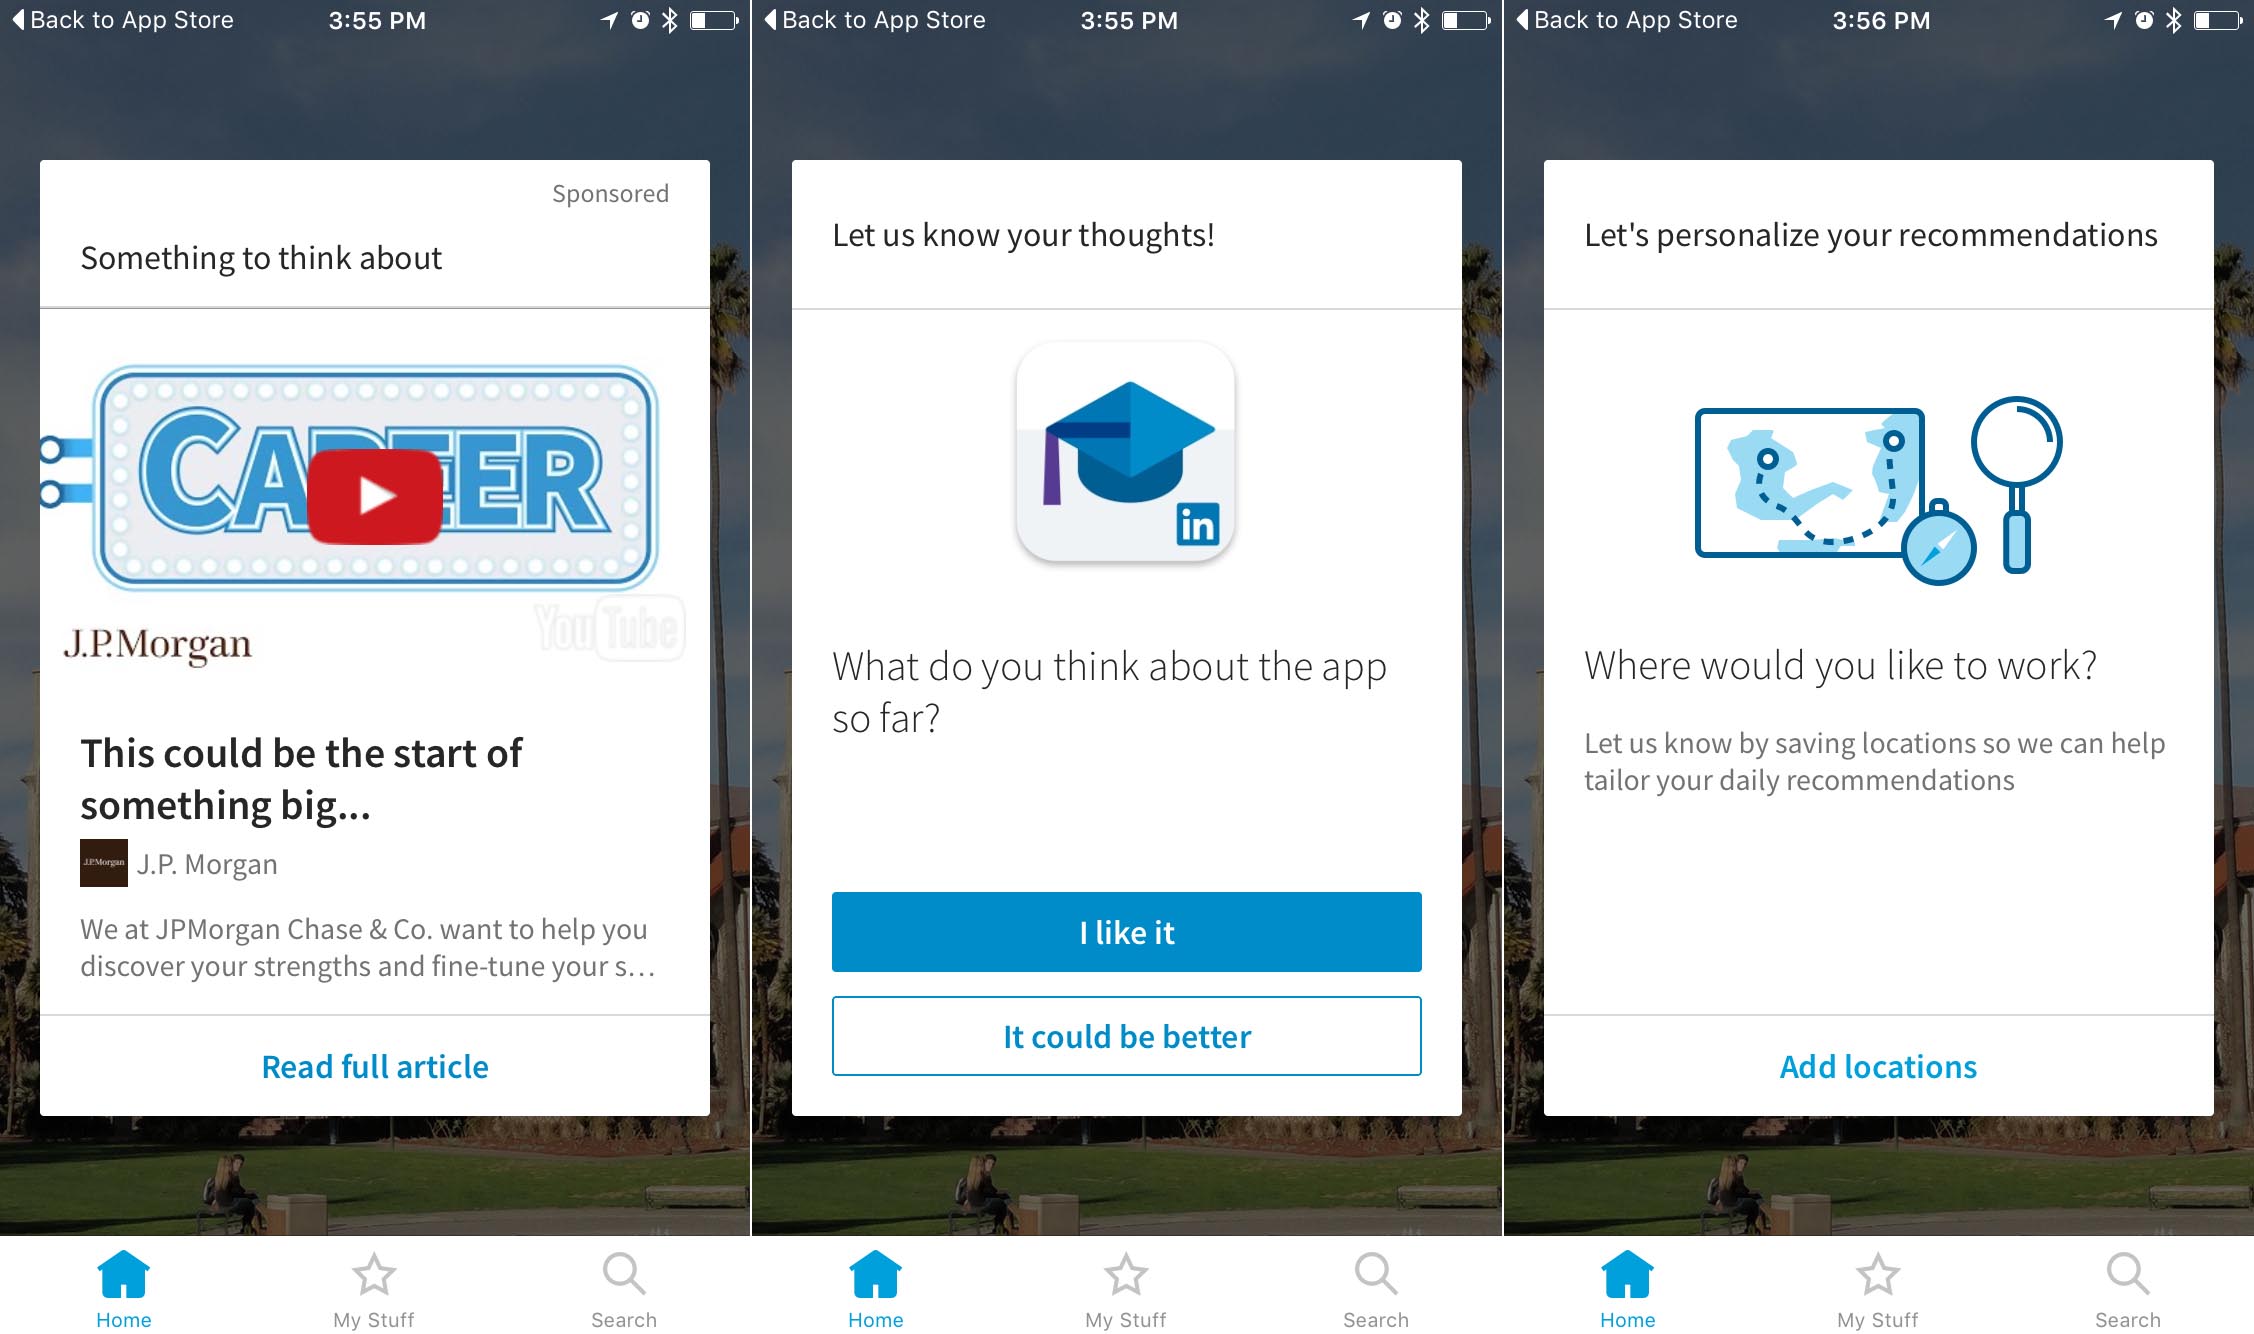 Screenshots of LinkedIn's Students app "extra credit" section that includes sponsored content and other career tips for students.